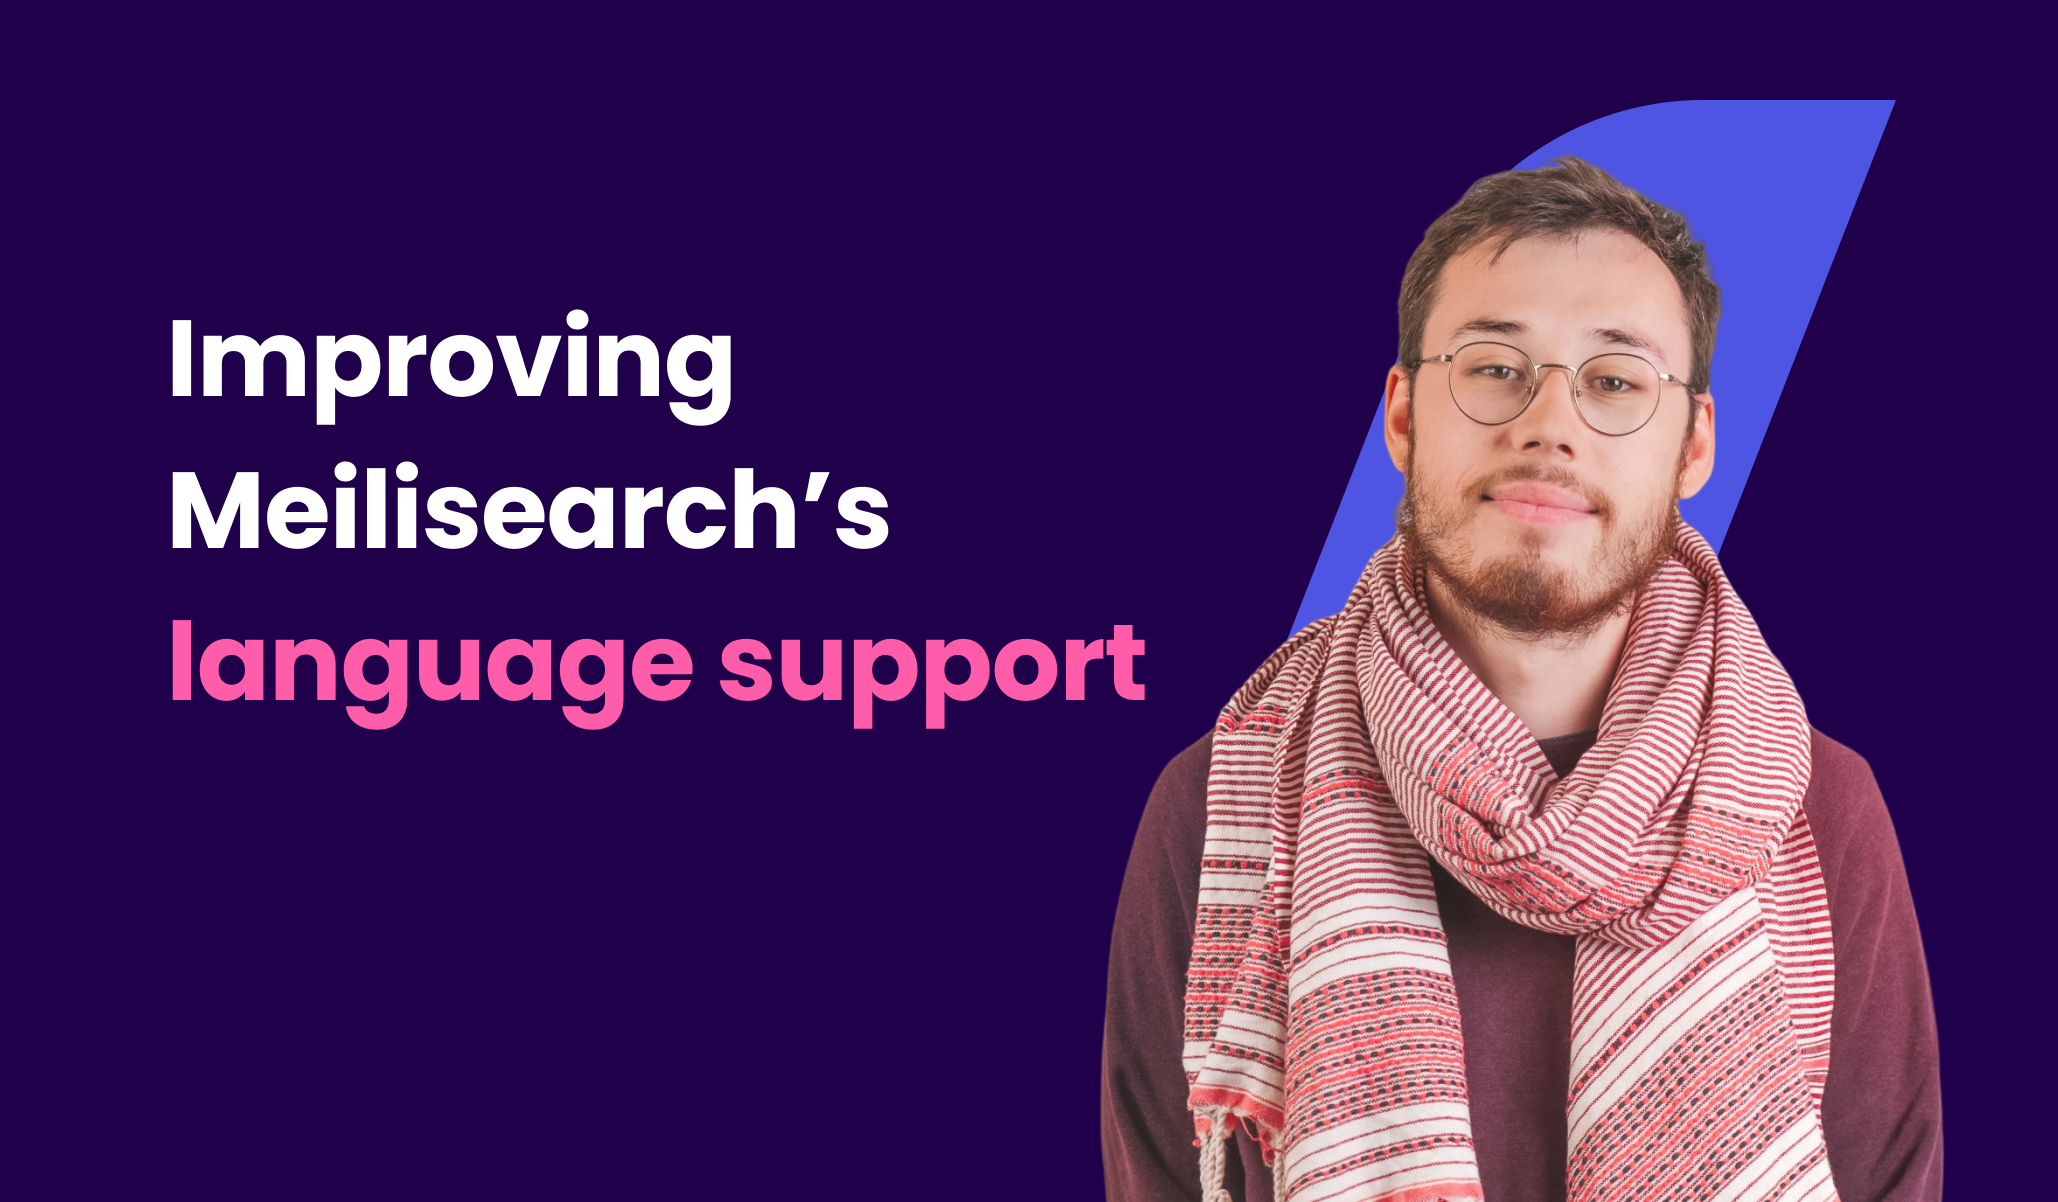 Improving Meilisearch’s language support